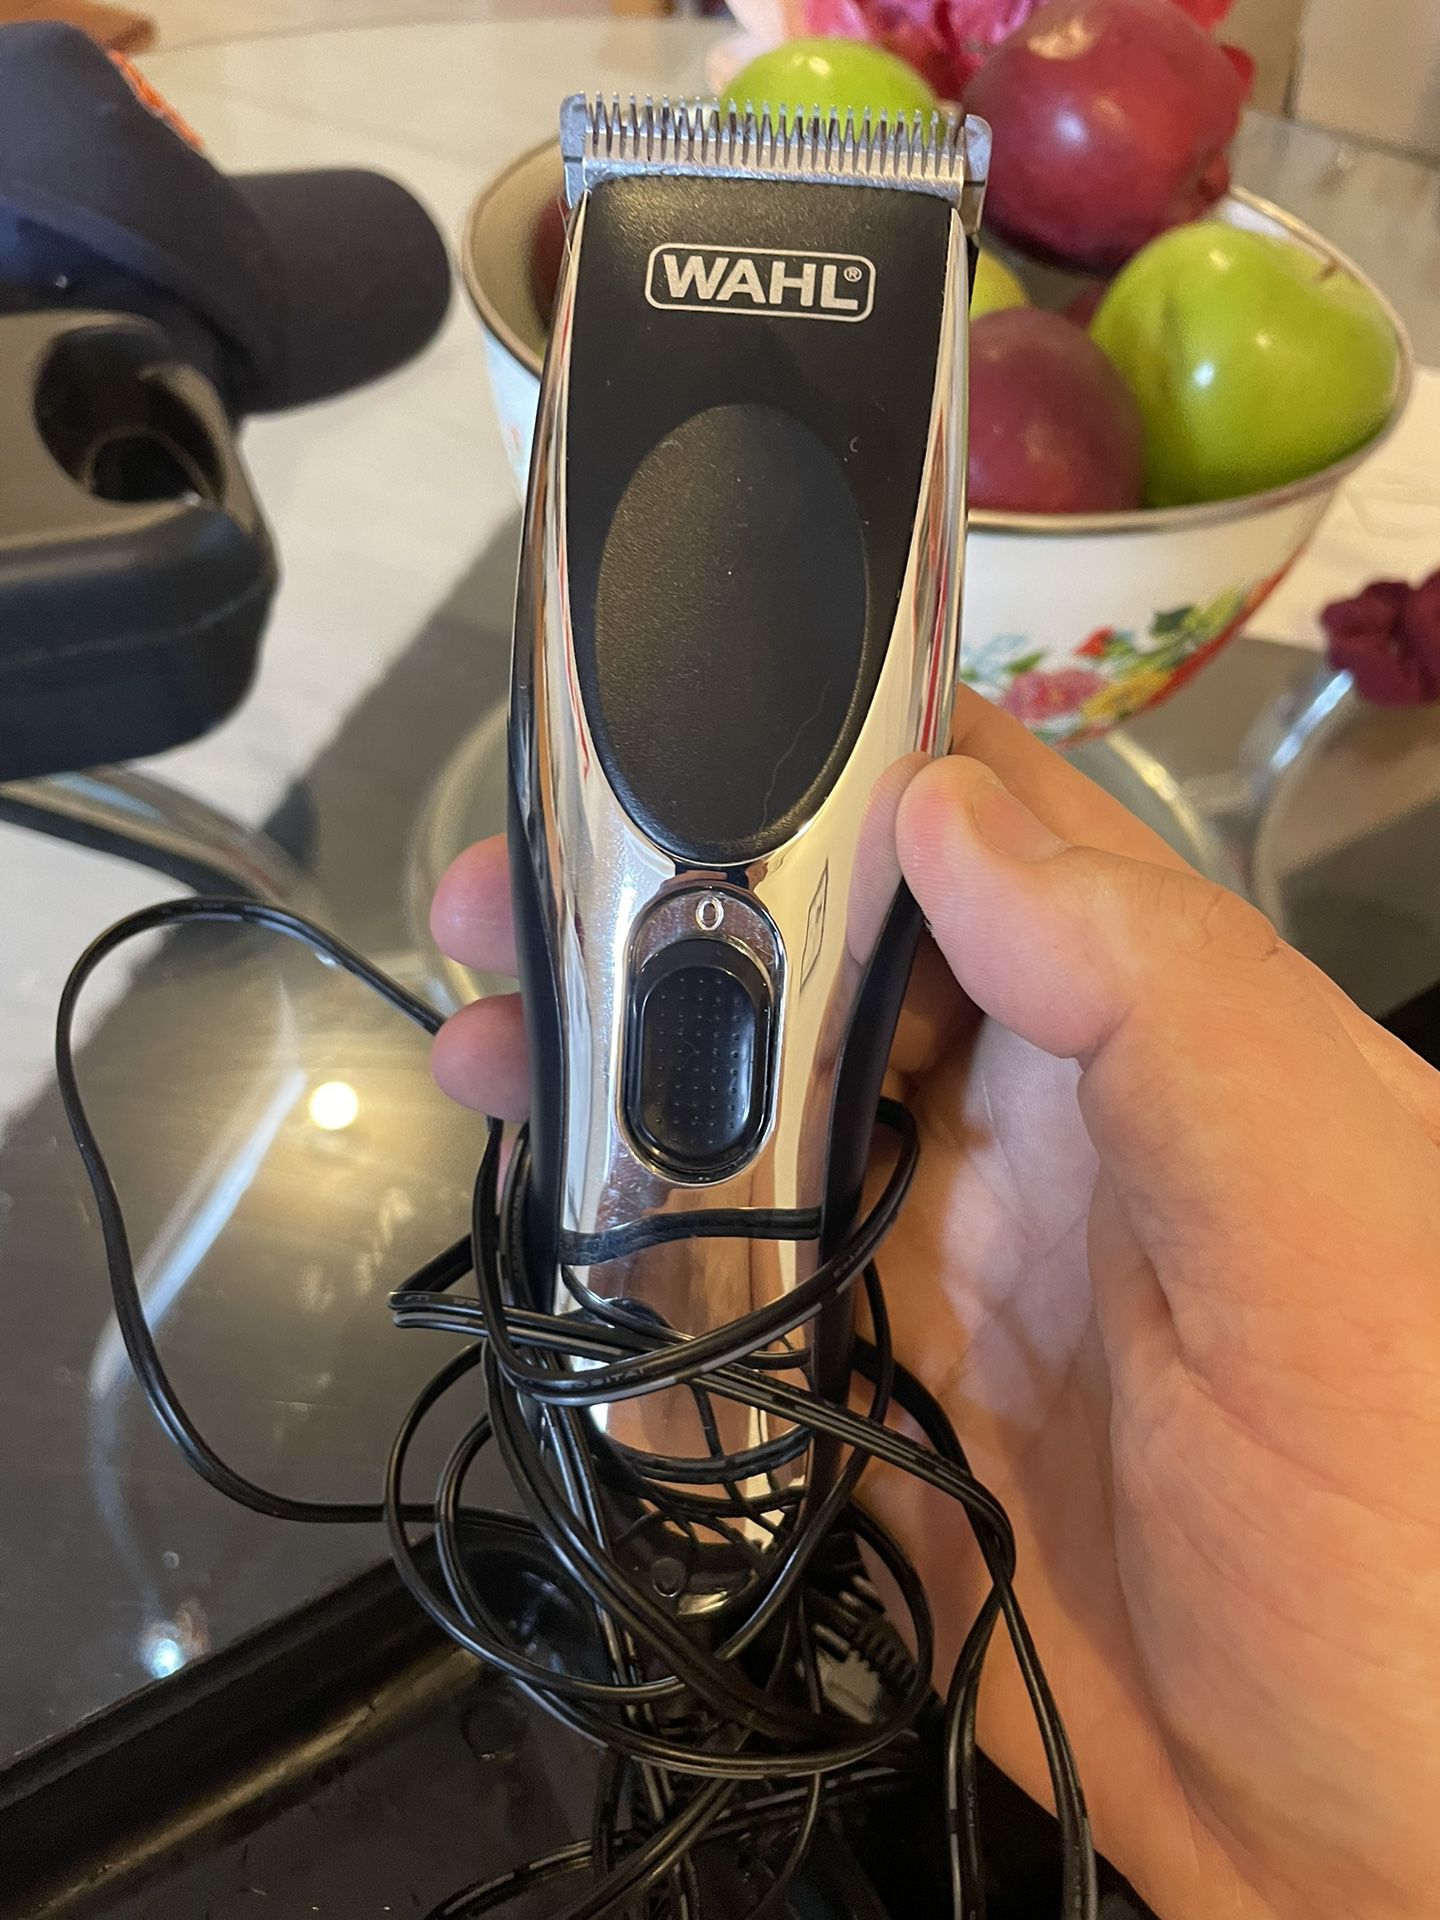 Wahl Haircut And Shaver For Sale